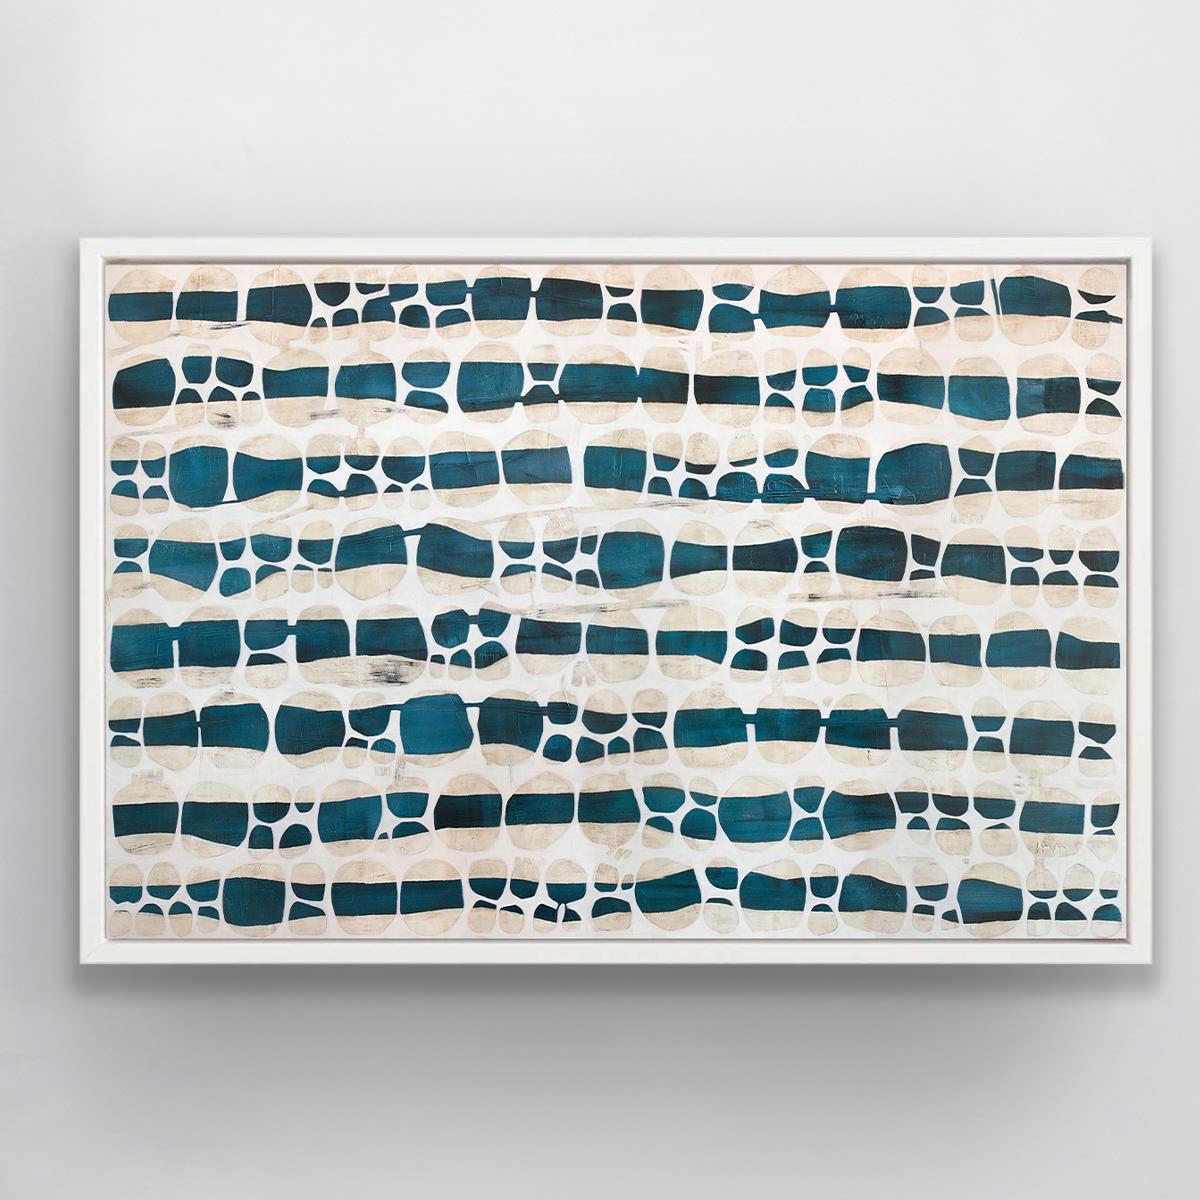 Sofie Swann Abstract Print - "Sand and Sea, " Limited Edition Giclee Print, 40" x 60"